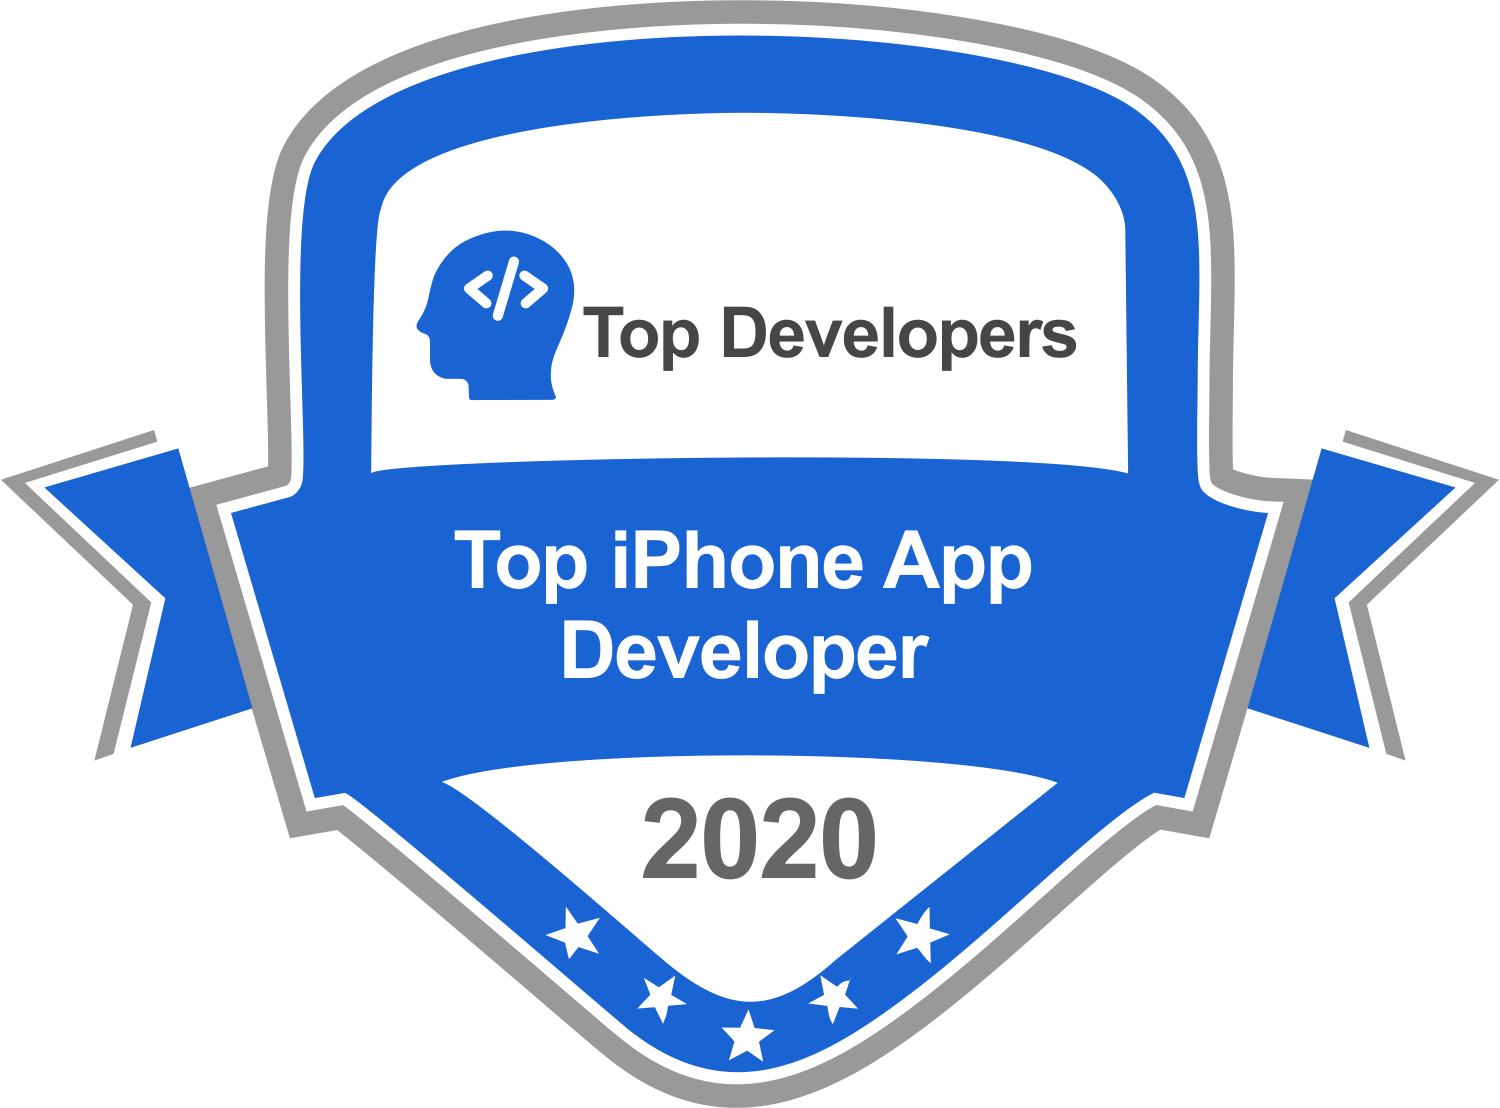 Top iPhone App Developers<br/> by <b>TopDevelopers</b>